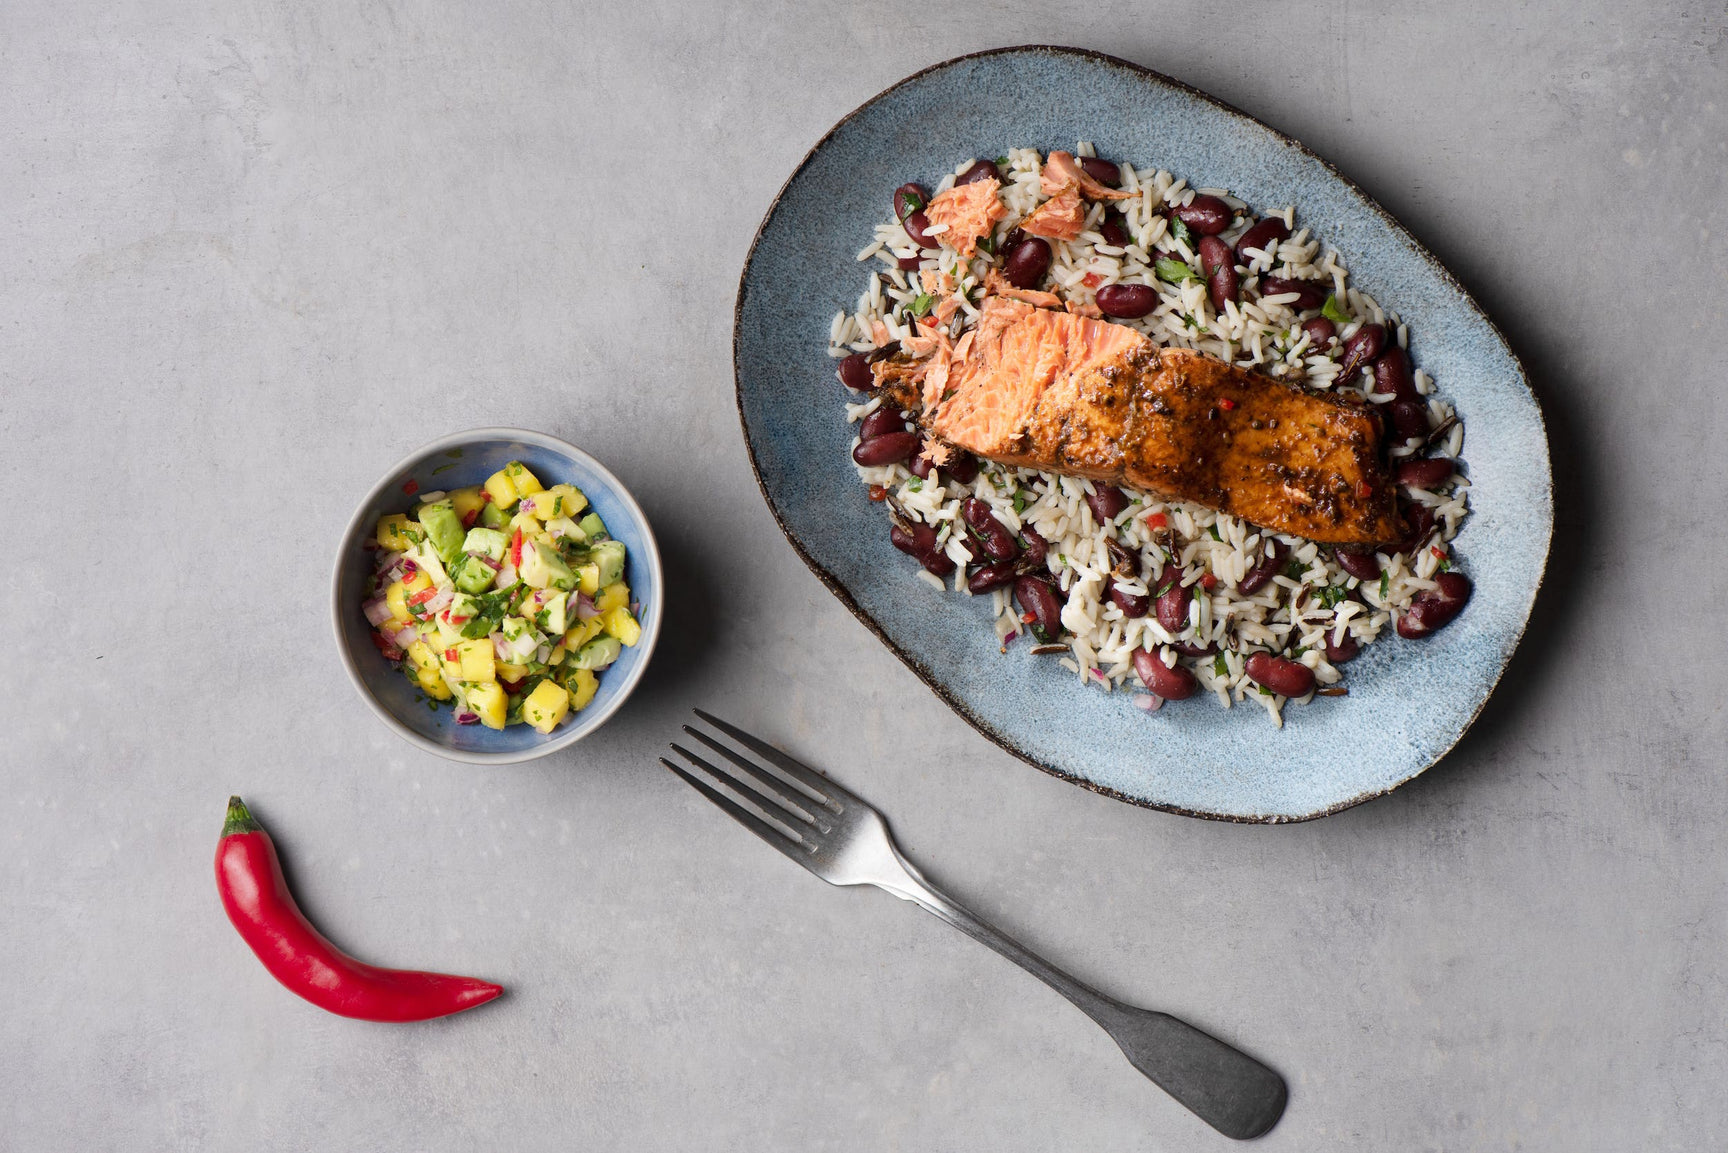 Caribbean-style sockeye salmon fillets with wild rice and a mango and avocado salsa